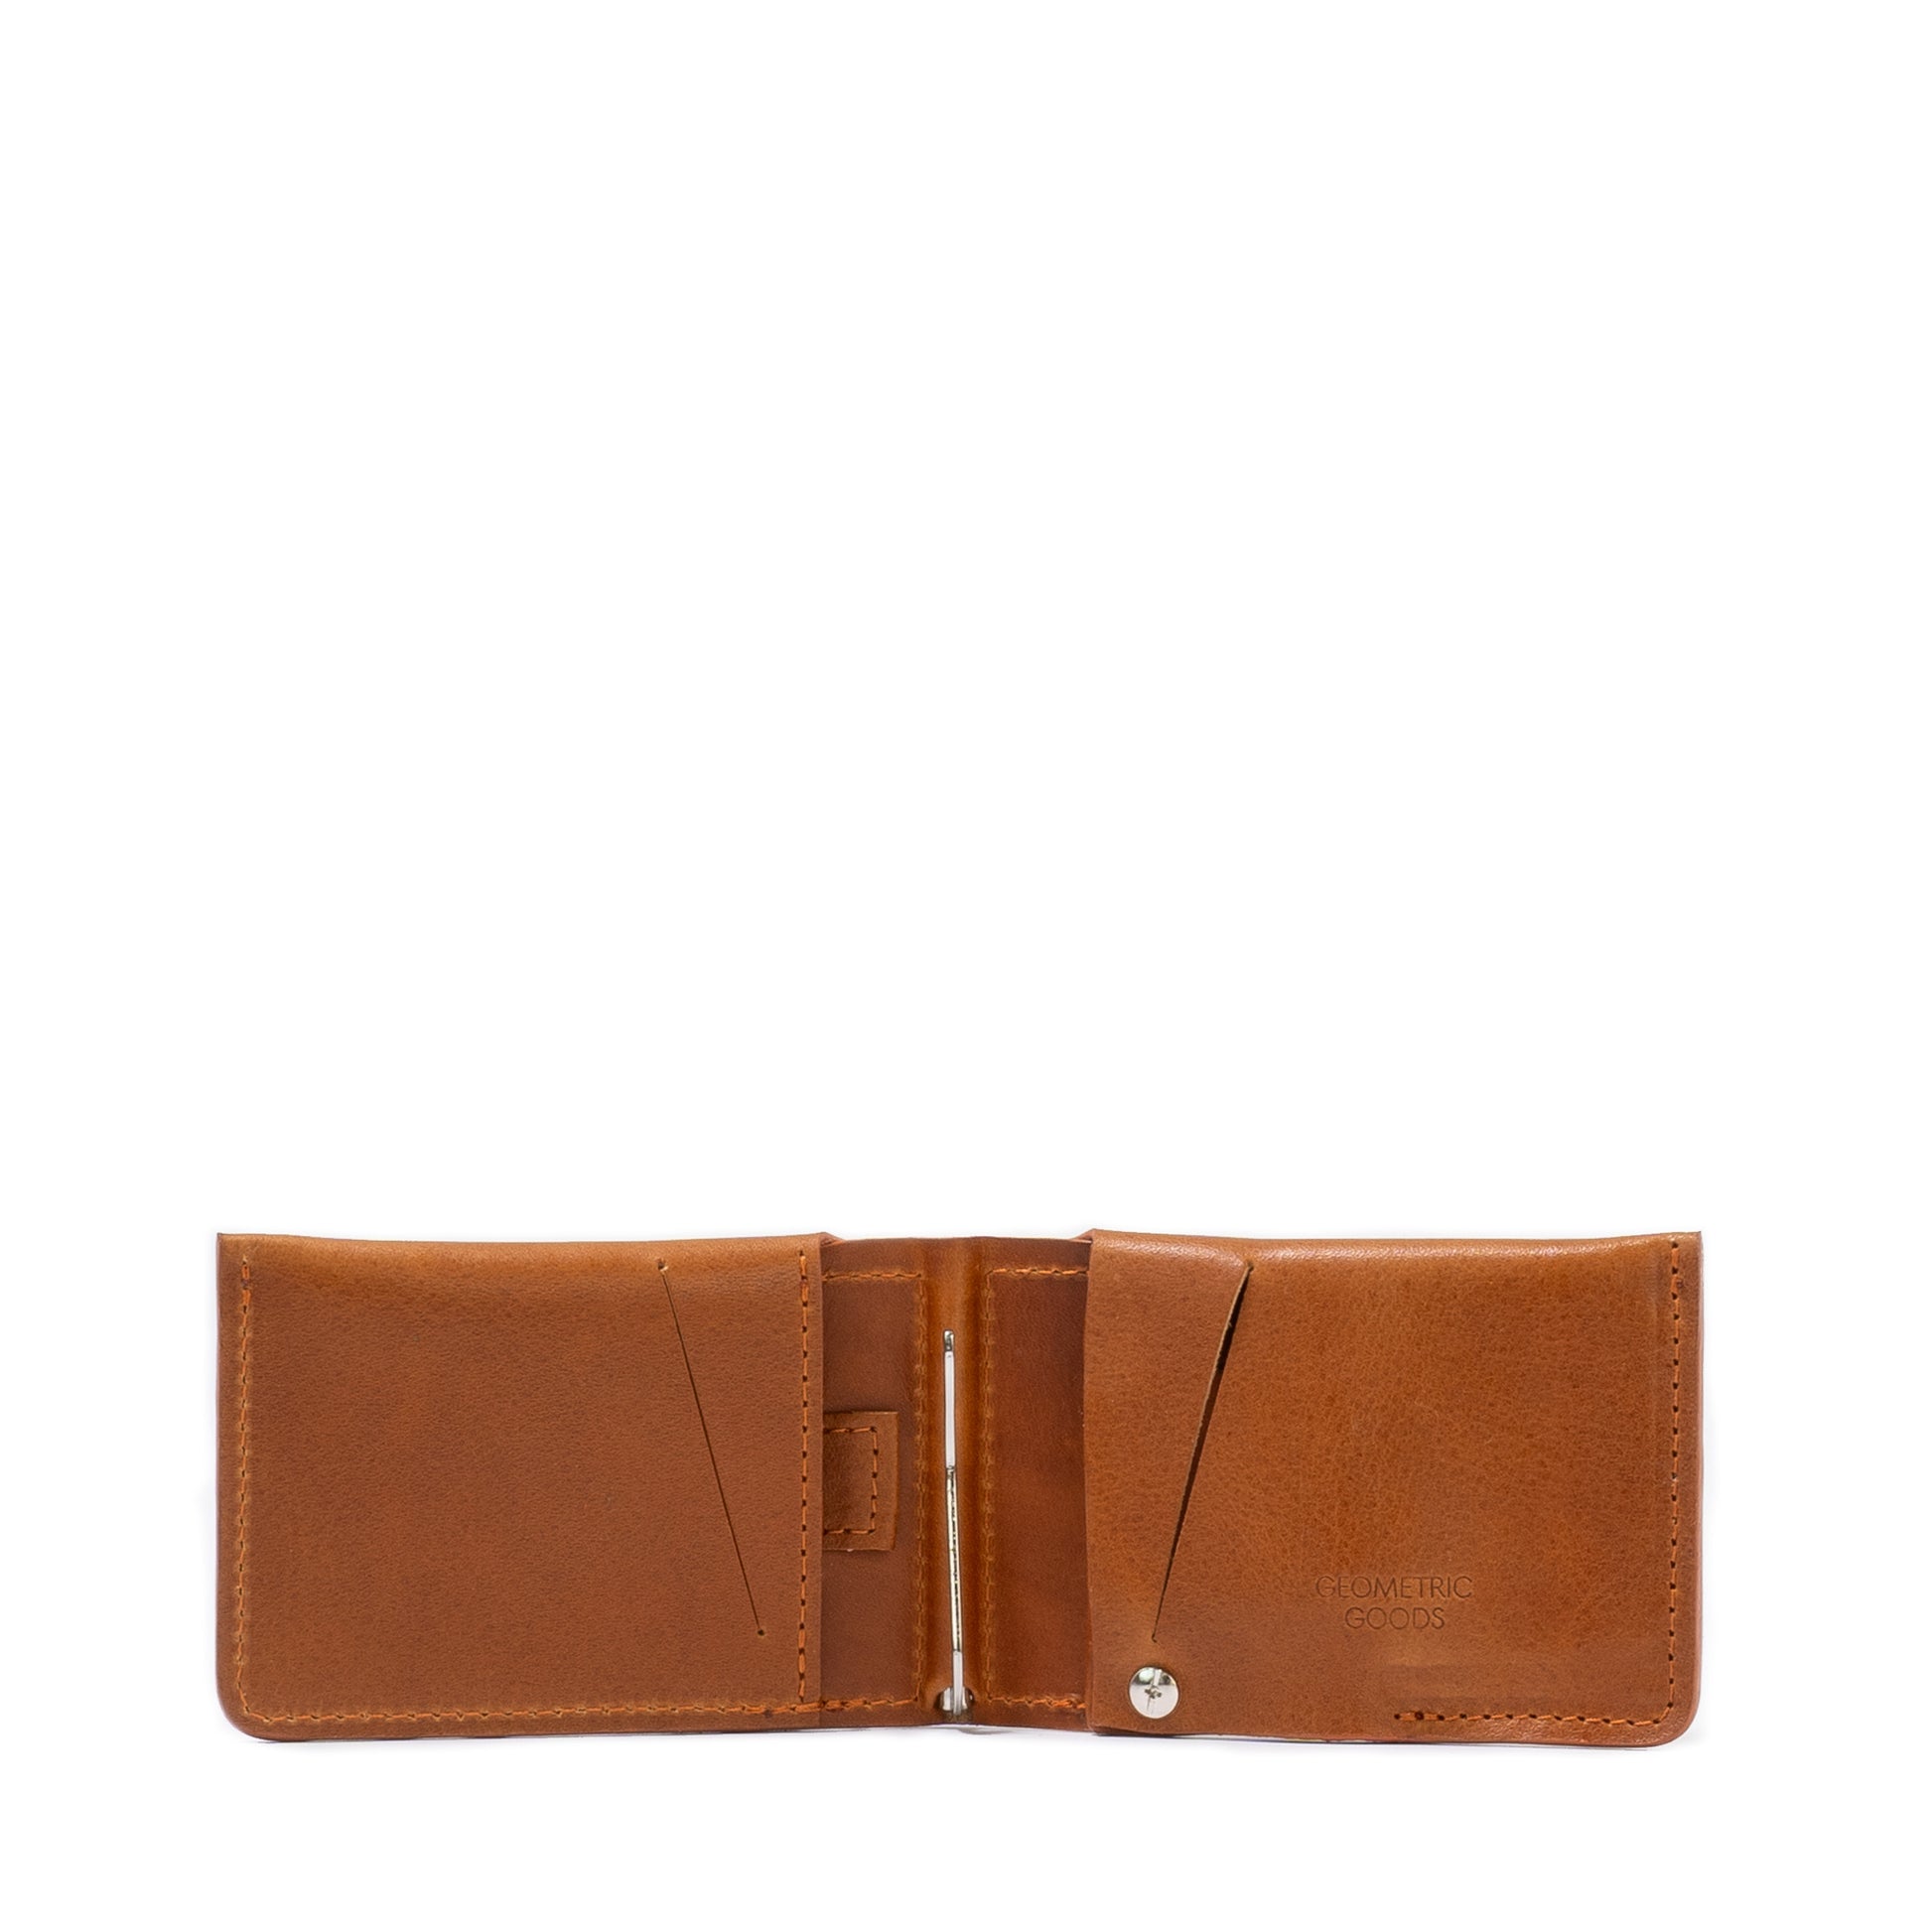 AirTag wallet with money clip for cash in tan (cognac brown) color, meticulously crafted from premium leather by Geometric Goods